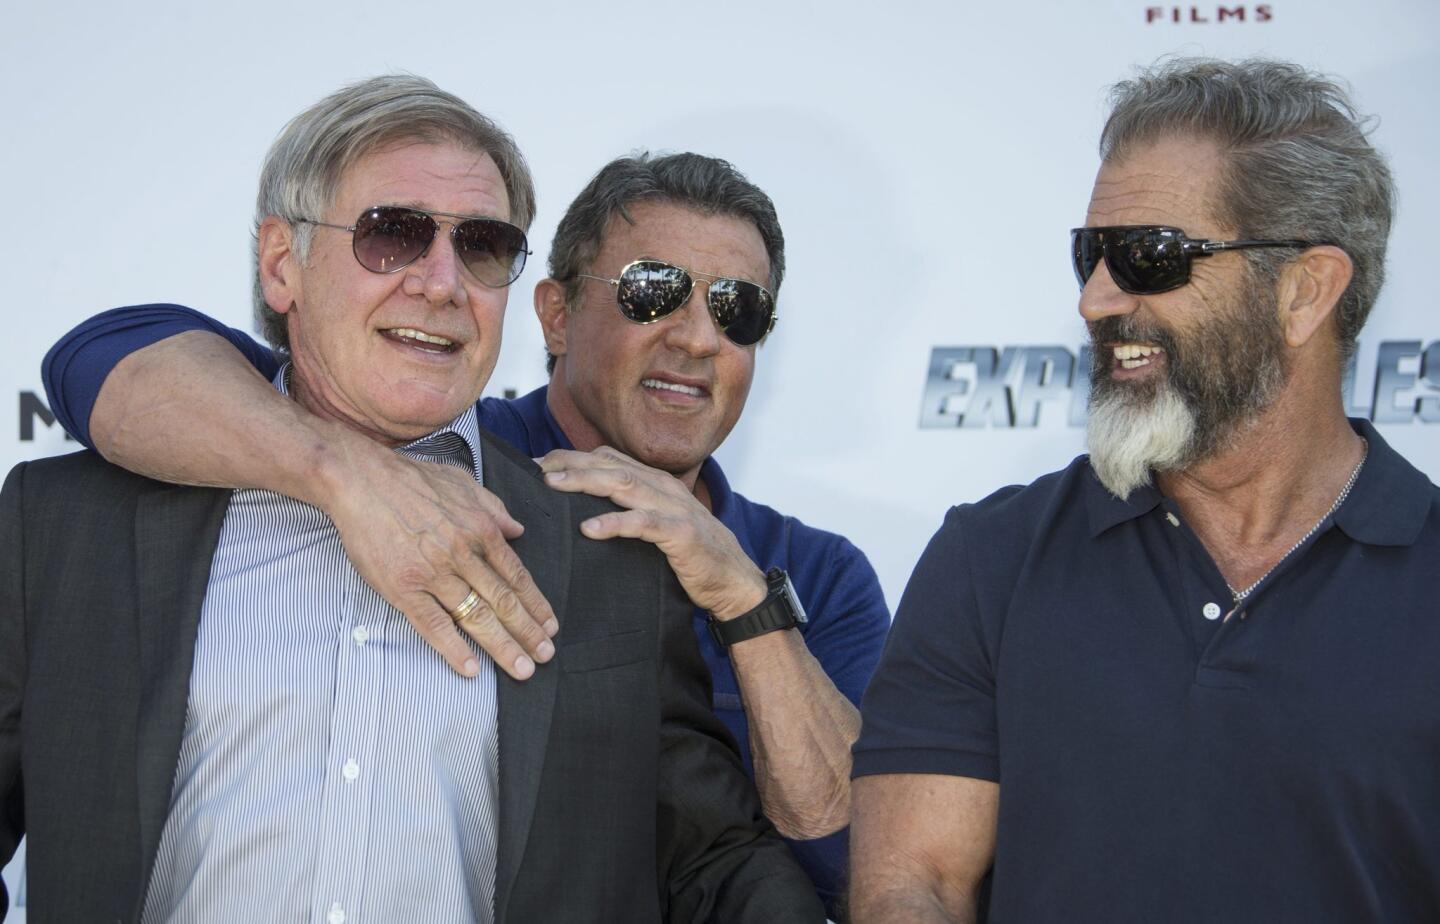 Neither the chokehold by Sylvester Stallone nor the sight of Mel Gibson's beard could faze Harrison Ford, but while filming the latest "Star Wars" installment, the 71-year-old actor broke his left leg -- putting his participation in the anticipated film on hold.